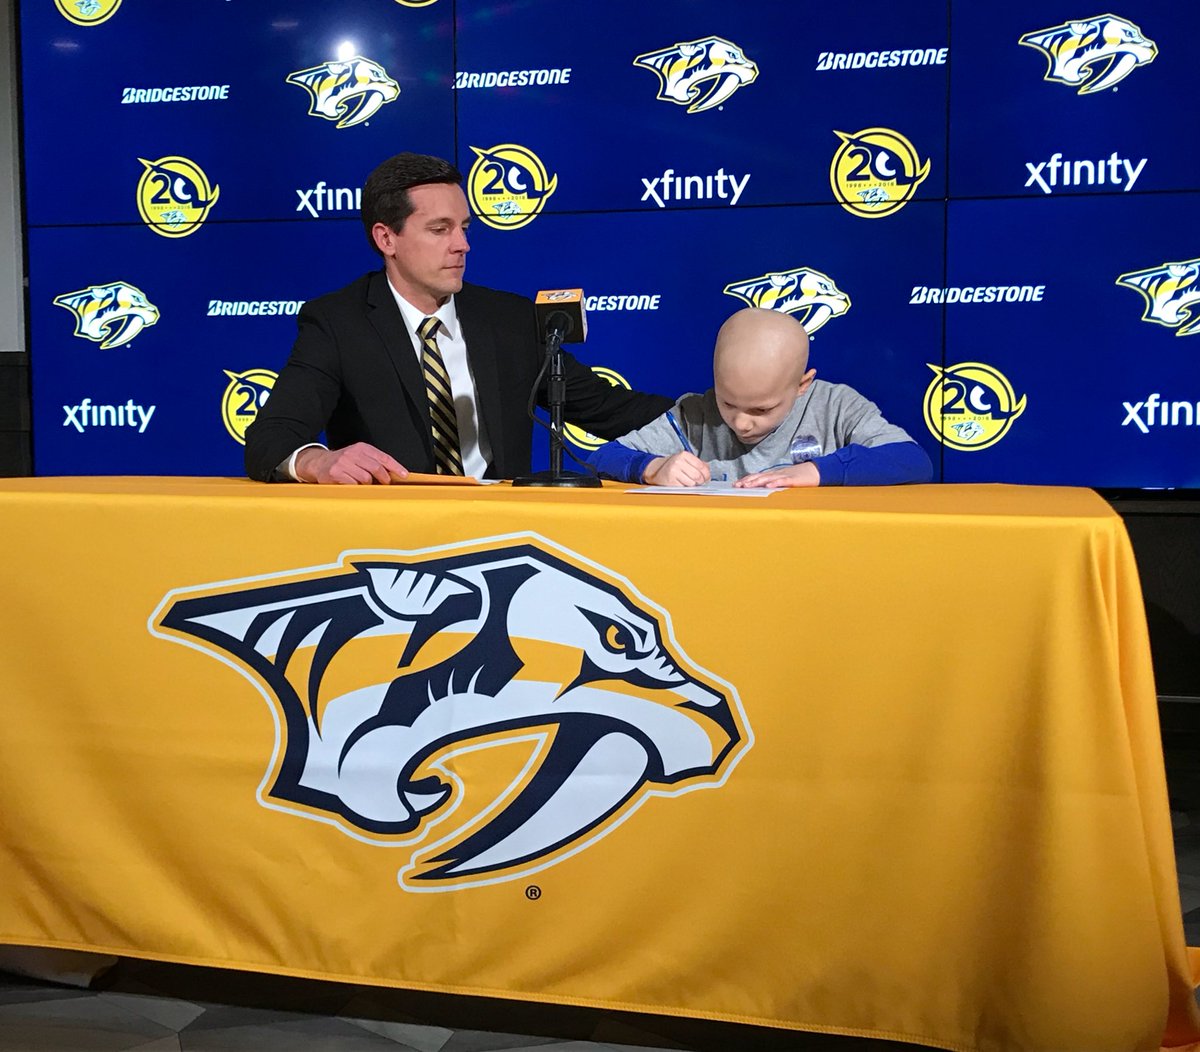 We’ve just signed Devin Roque to a contract ✍️  #Preds | @MakeAWishMidTN https://t.co/ehQAo4VSFE